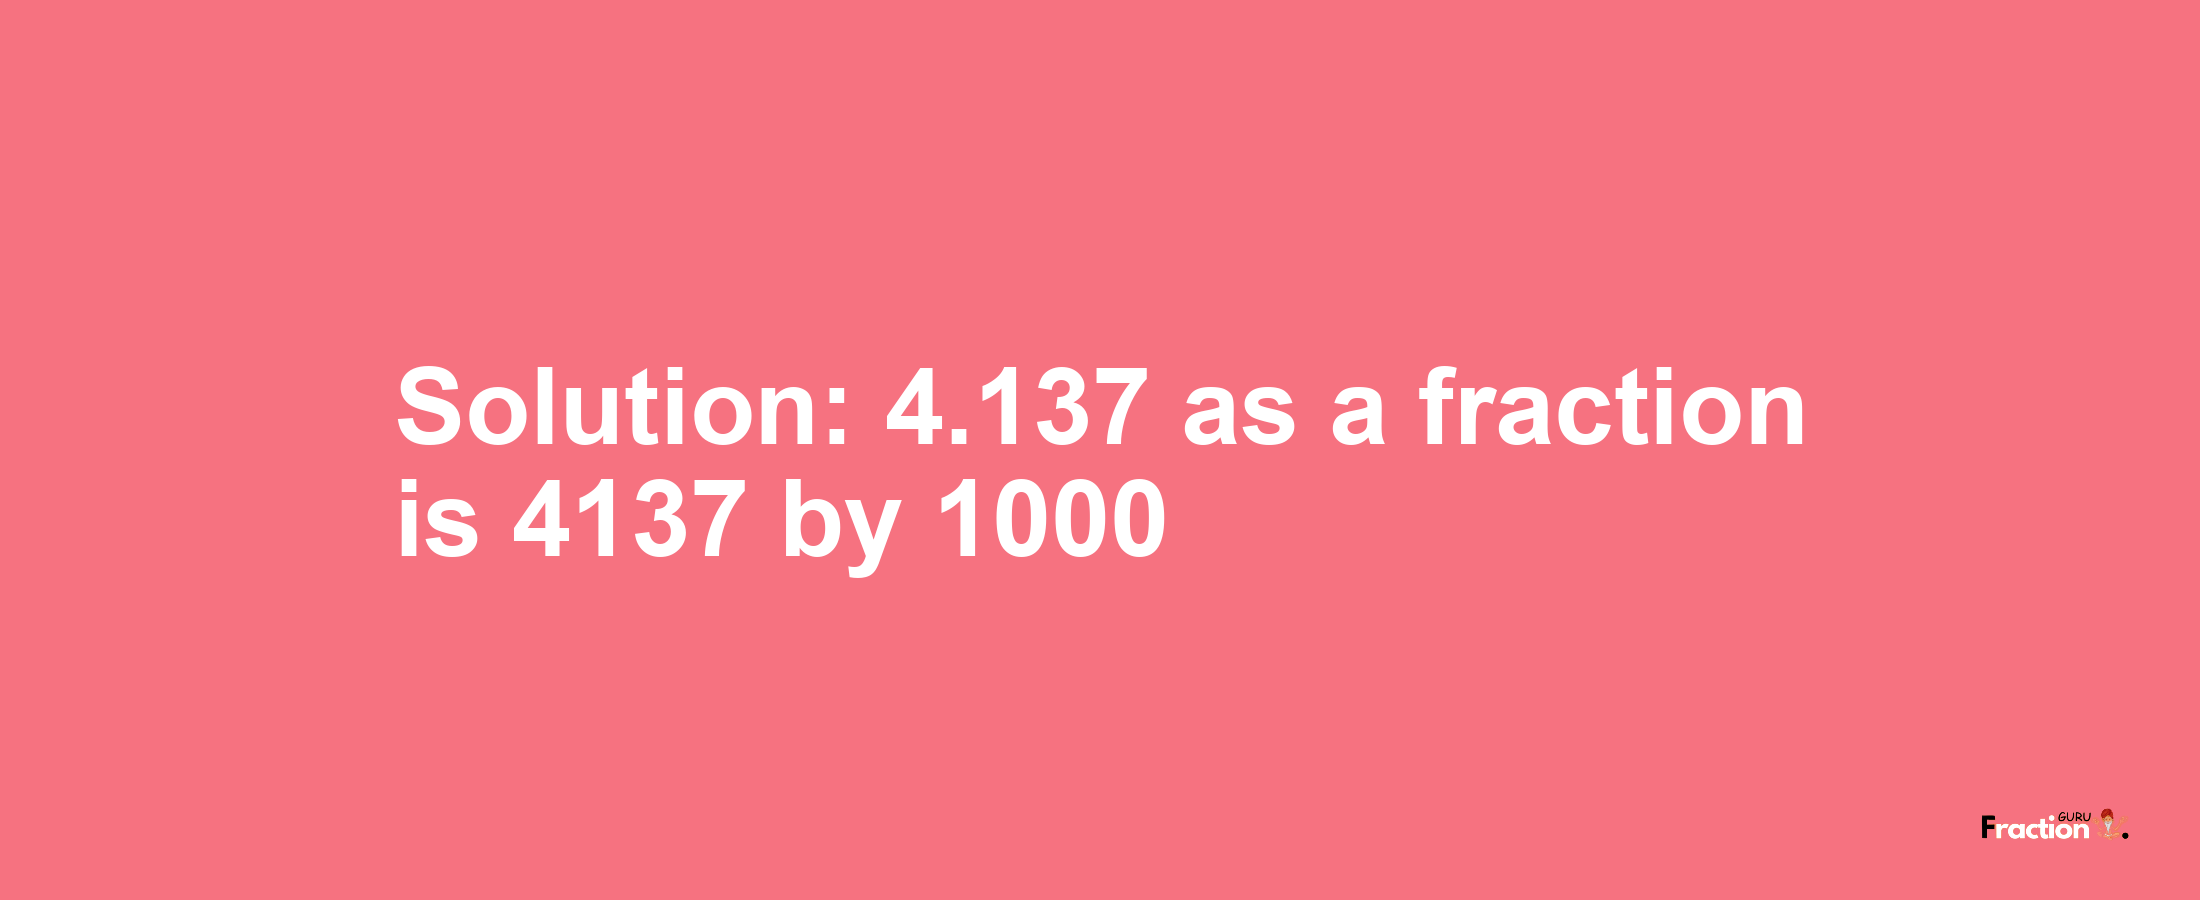 Solution:4.137 as a fraction is 4137/1000